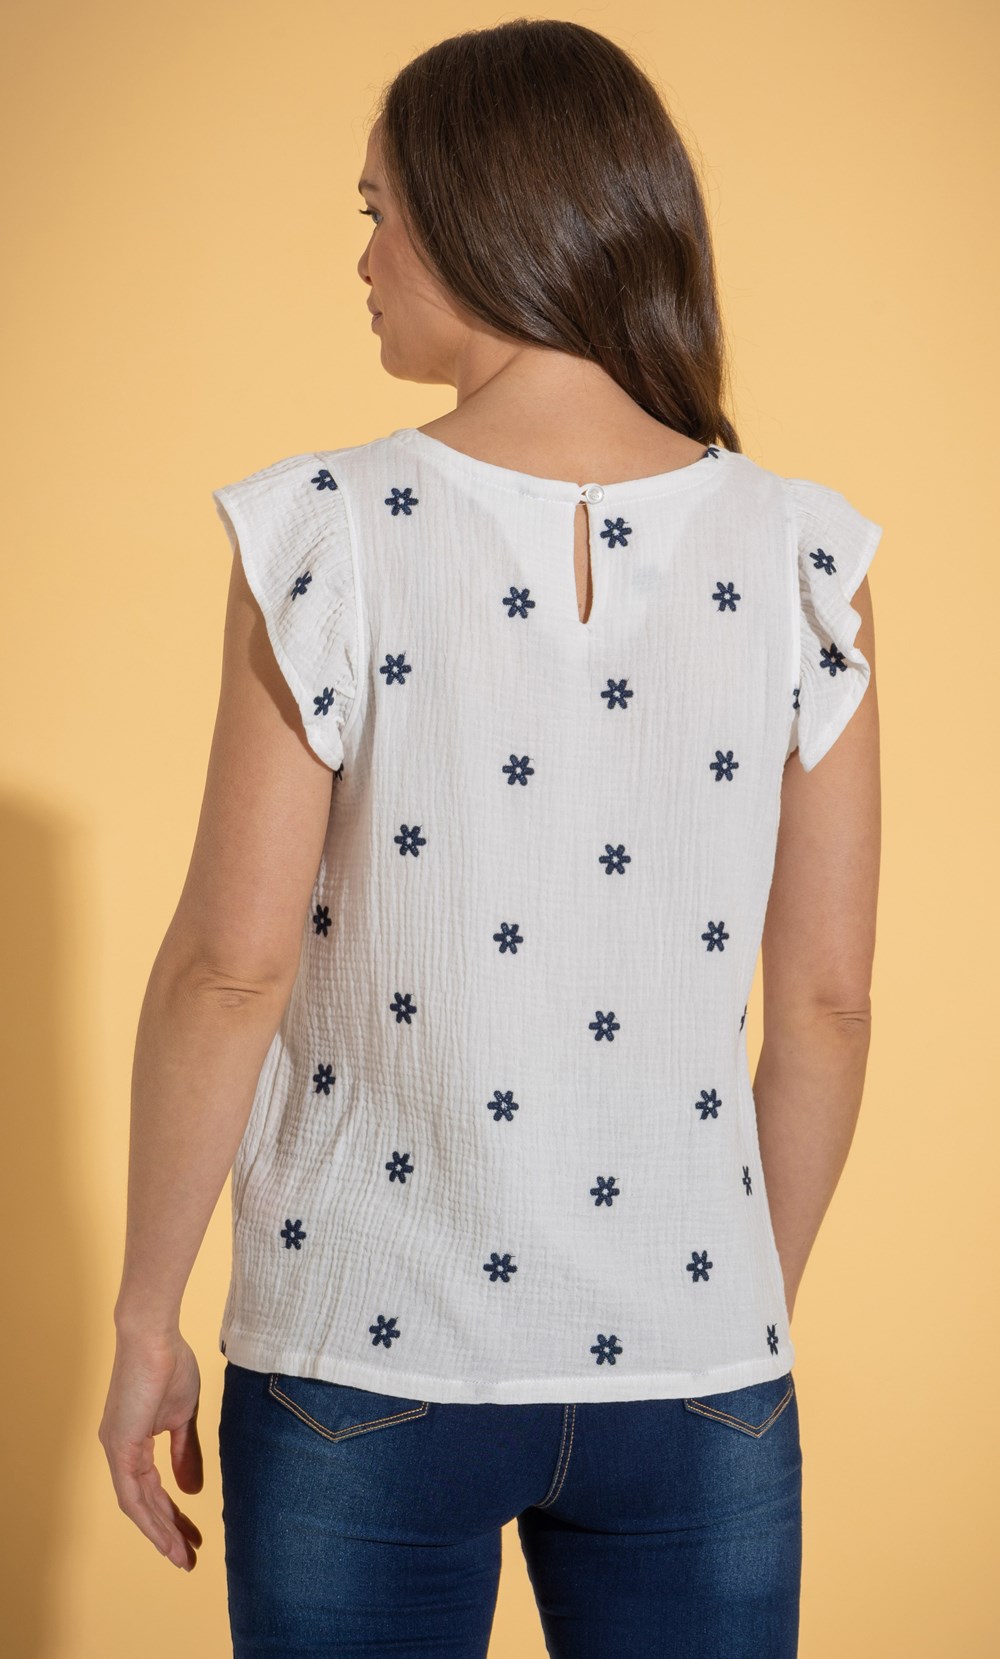 Floral Embroidered Textured Cotton Top